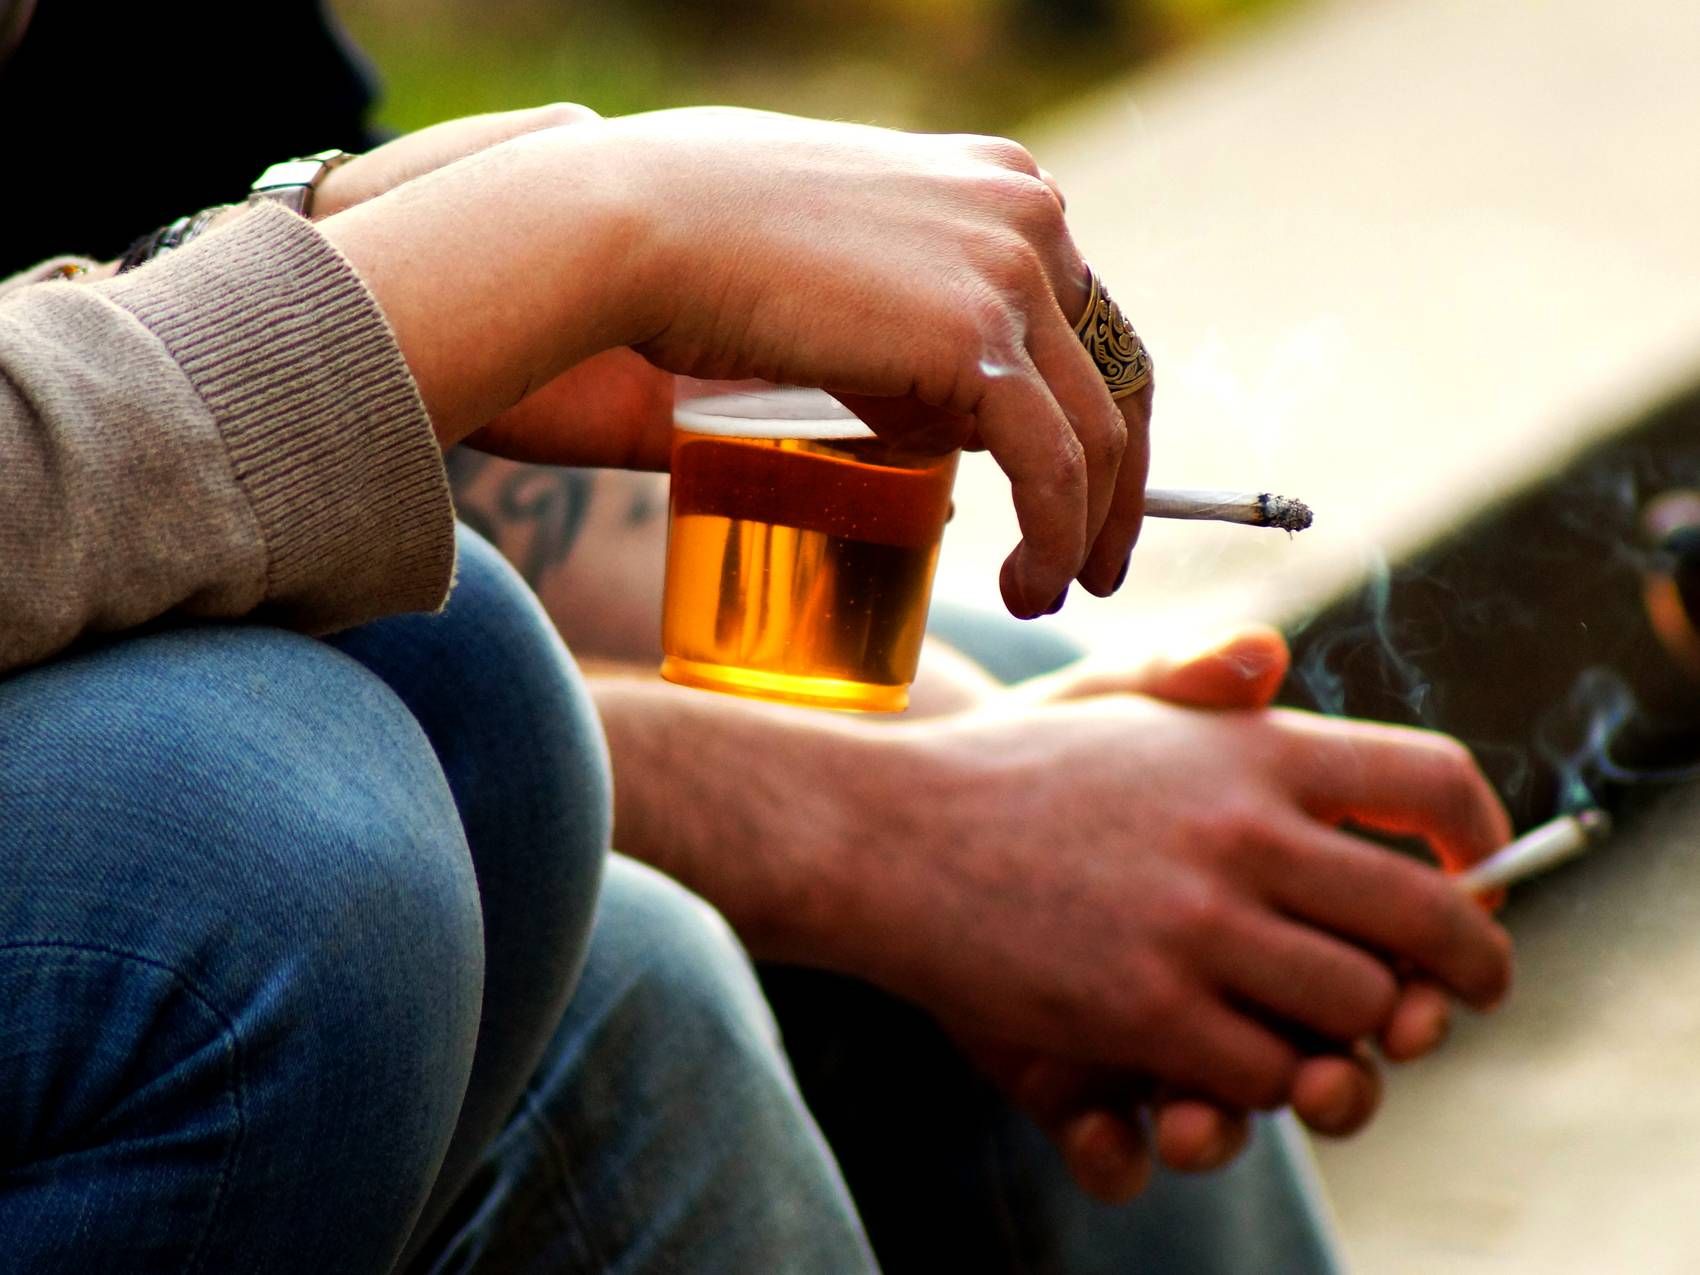 The research looked at varenicline, for nicotine addiction, and naltrexone, for excessive alcohol consumption.